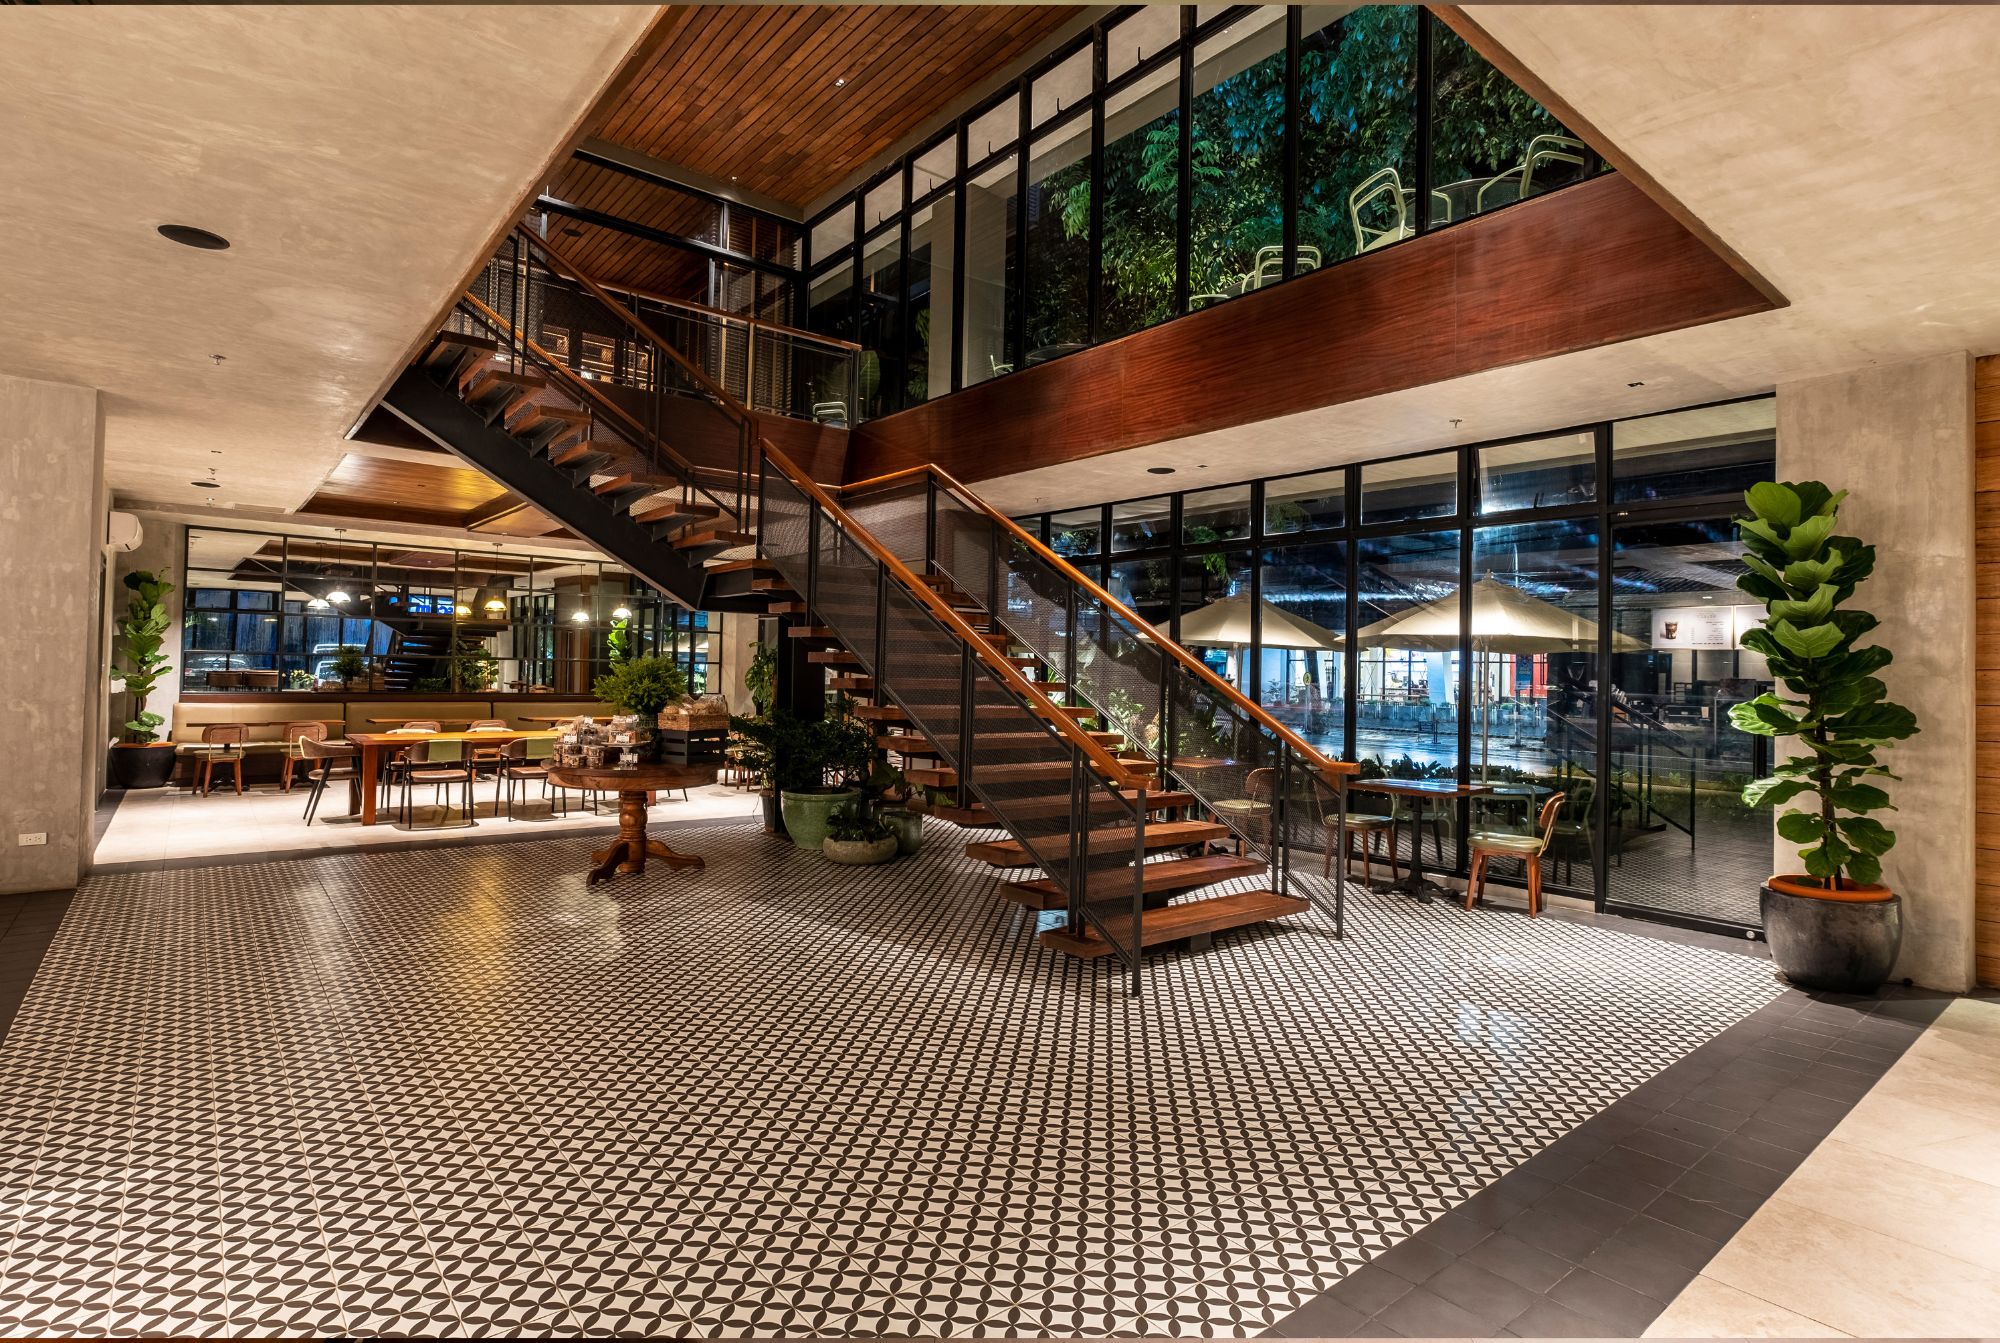 The central staircase in a wide open space at Cafe Bobs designed by Larawan Ink, with wooden treads and metal balustrade.